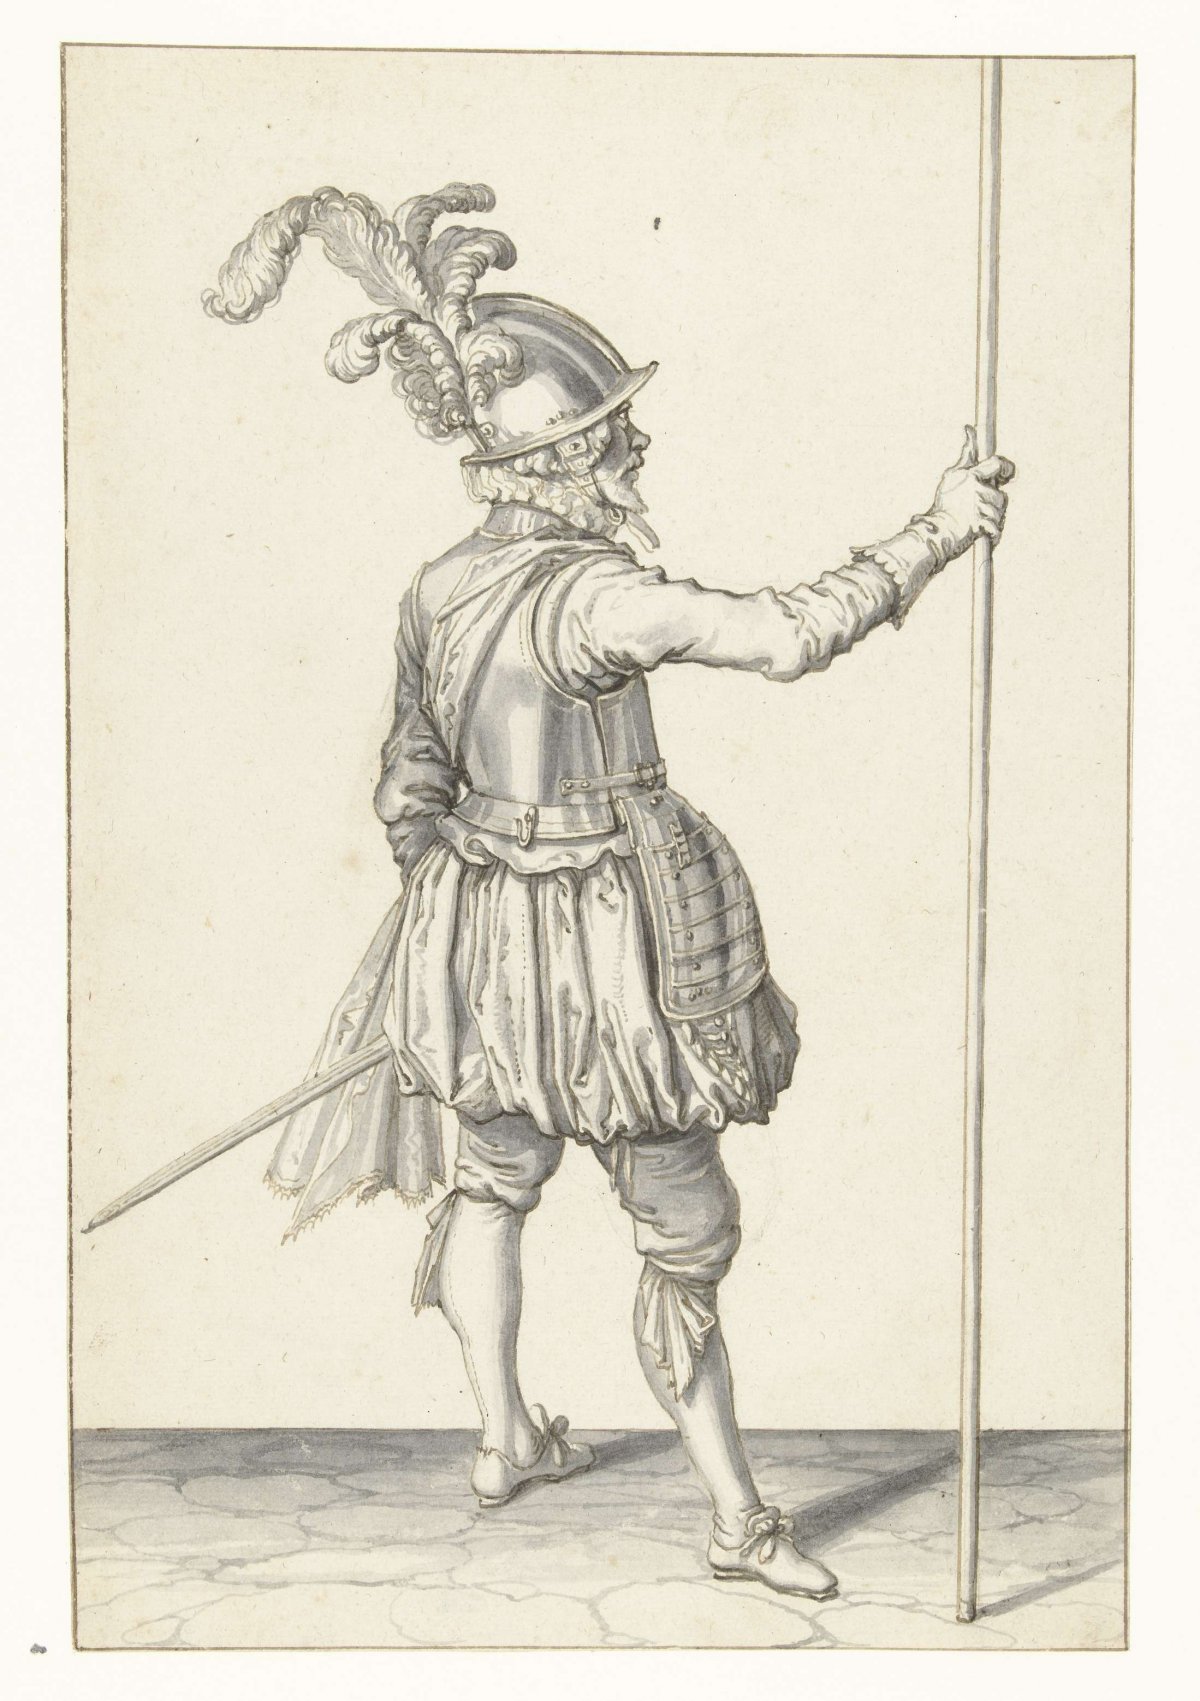 Soldier, seen from behind, holding his spear upright with his right hand, Jacques de Gheyn (II), 1596 - 1606